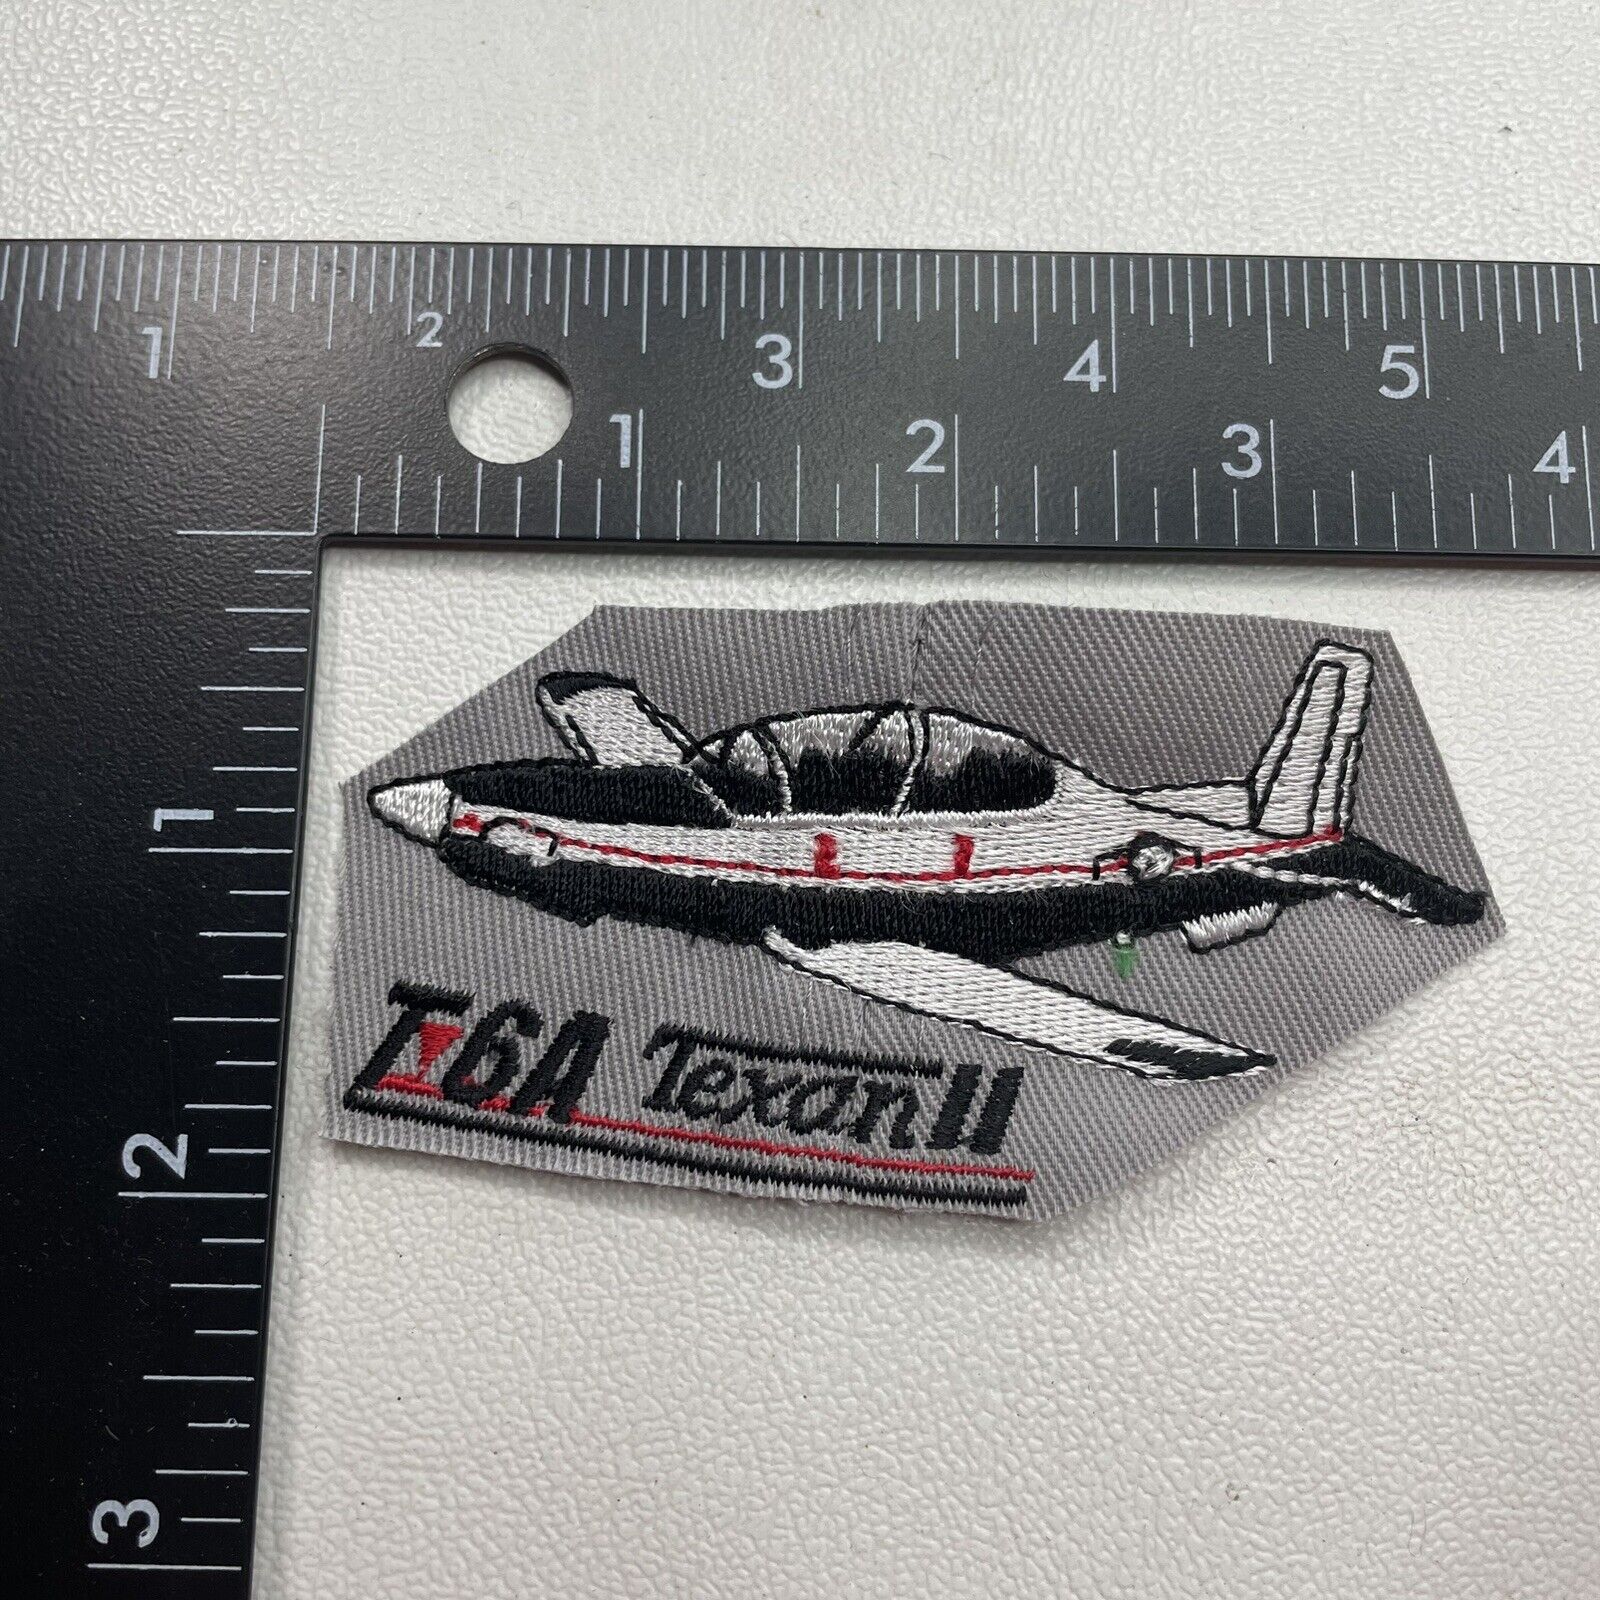 Patch-Ish Piece Cut-From-Hat Beechcraft T-6A TEXAN II Airplane Patch 20U6